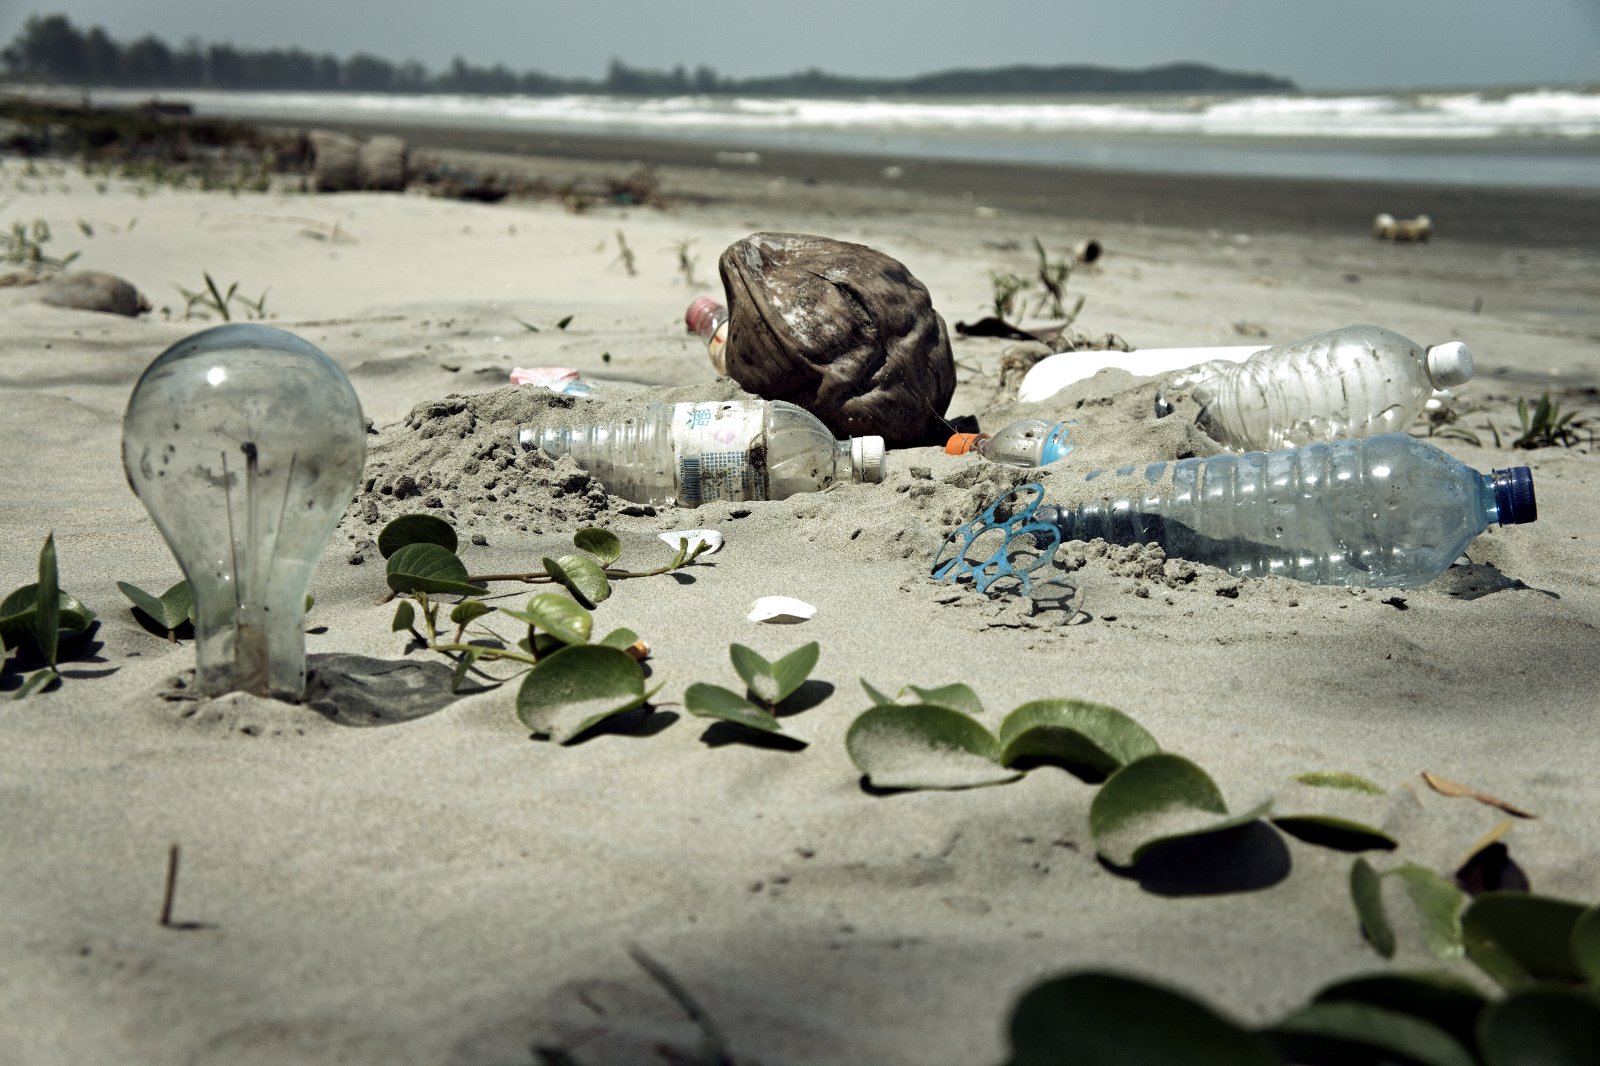 sustainable tips, plastic swaps, avoid single use plastics, Water_Pollution_with_Trash_Disposal_of_Waste_at_the_Garbage_Beach_Alenka_Mali_photography